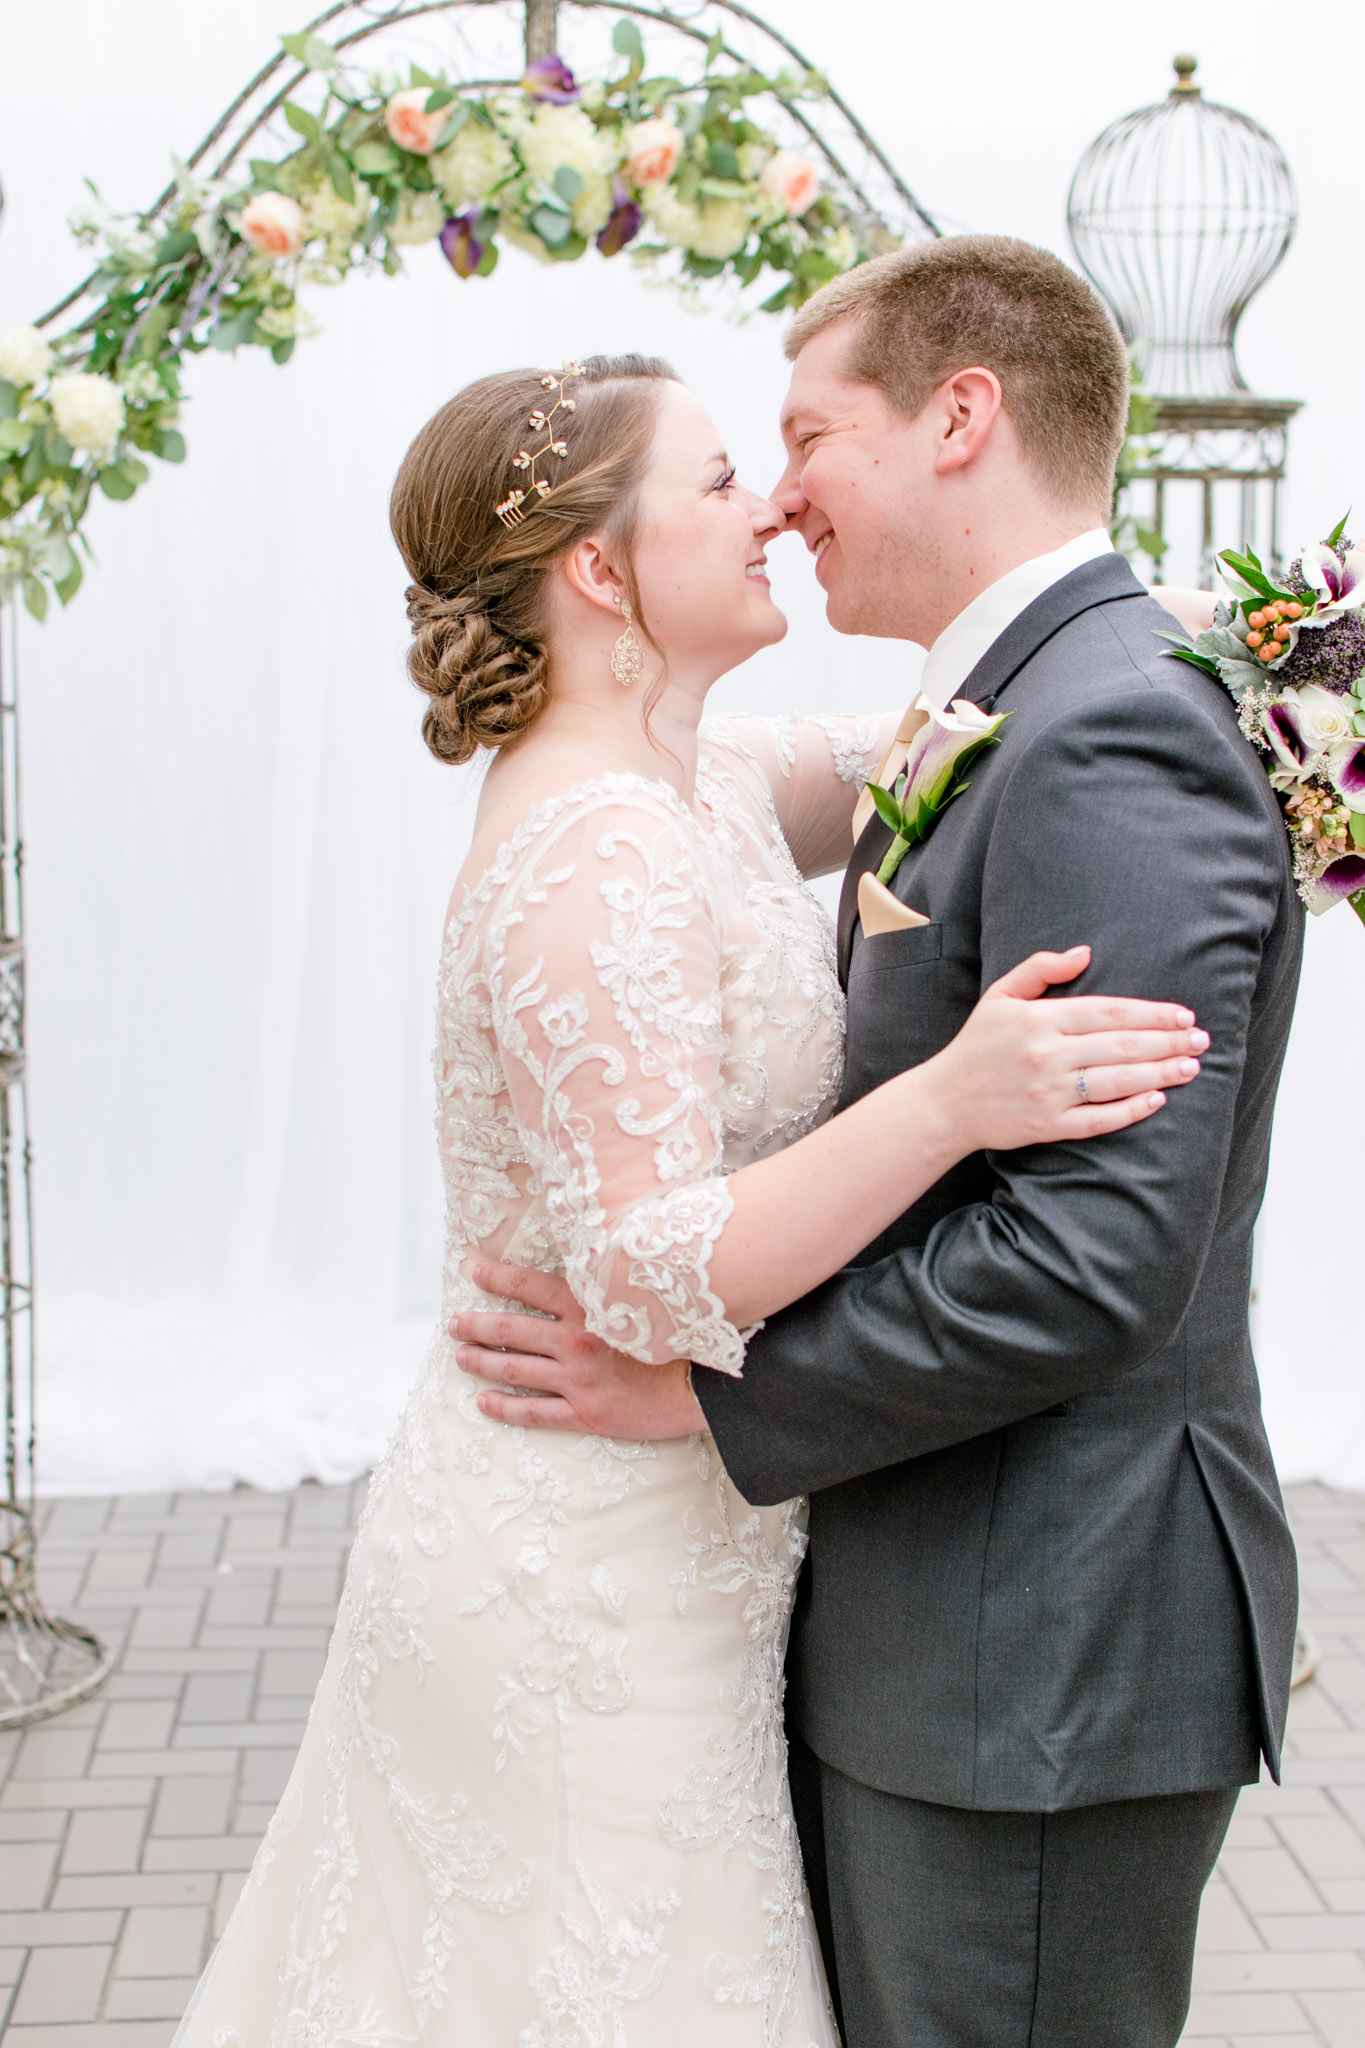 Indianapolis Bride and groom kiss on wedding day during portraits